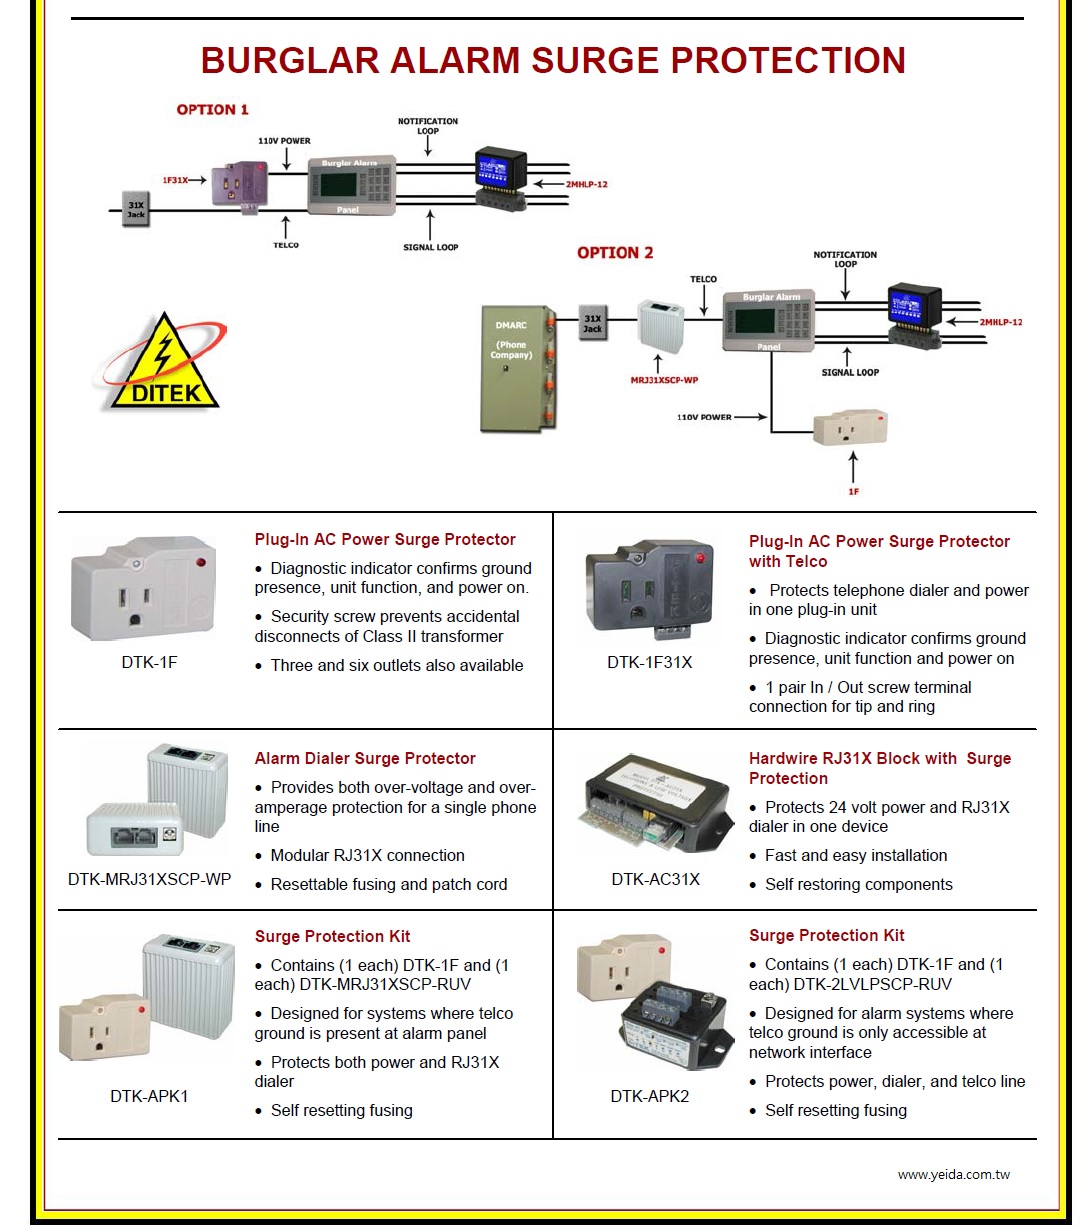 DTK-APK2 (DTK-1F, DTK-2LVLPSCP-RUV) alarm systems Surge Protection Kit, Protects power, dialer, and telco line 防盜系統雷擊保護器套件產品圖